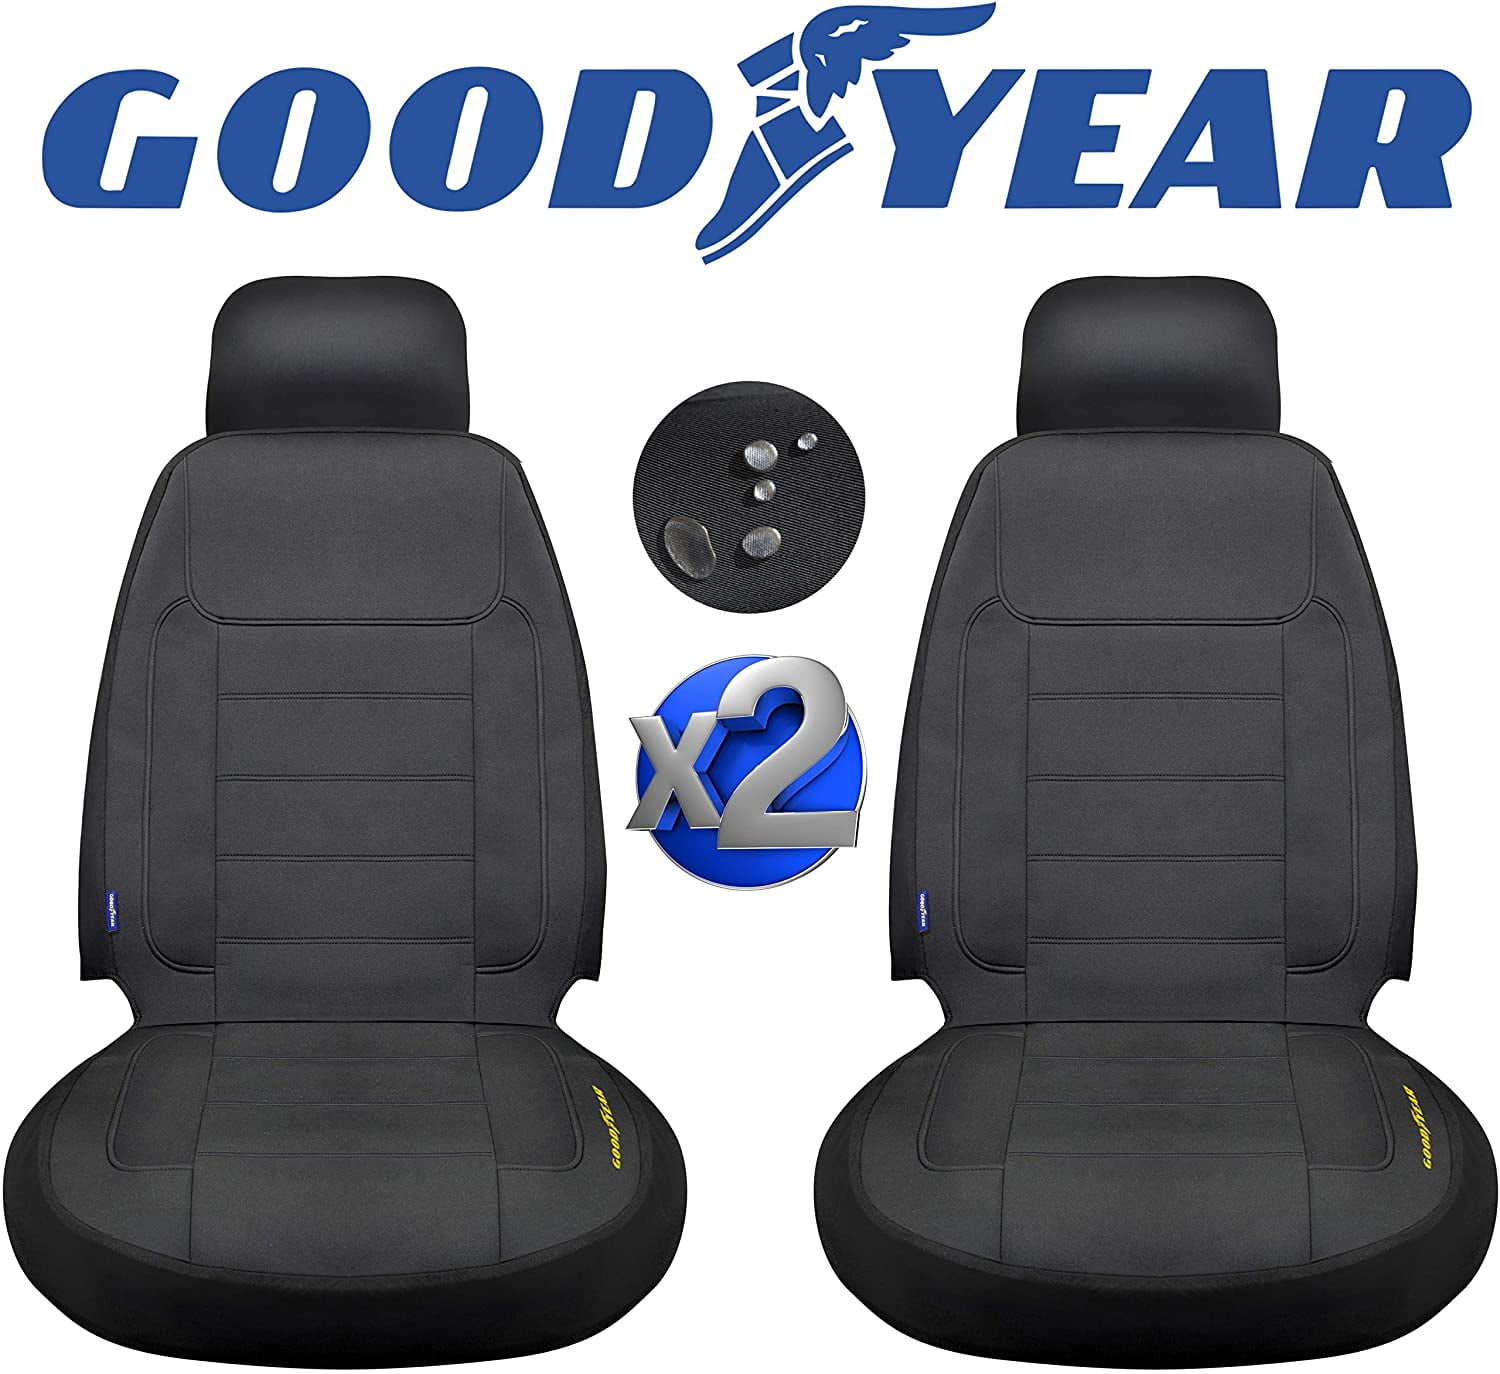 Goodyear 2-Pack Waterproof Car Seat Covers for Front Seats, Liquid and  Stain Repellent Neoprene, Machine Washable, For Sedans, SUVs and Trucks,  Black